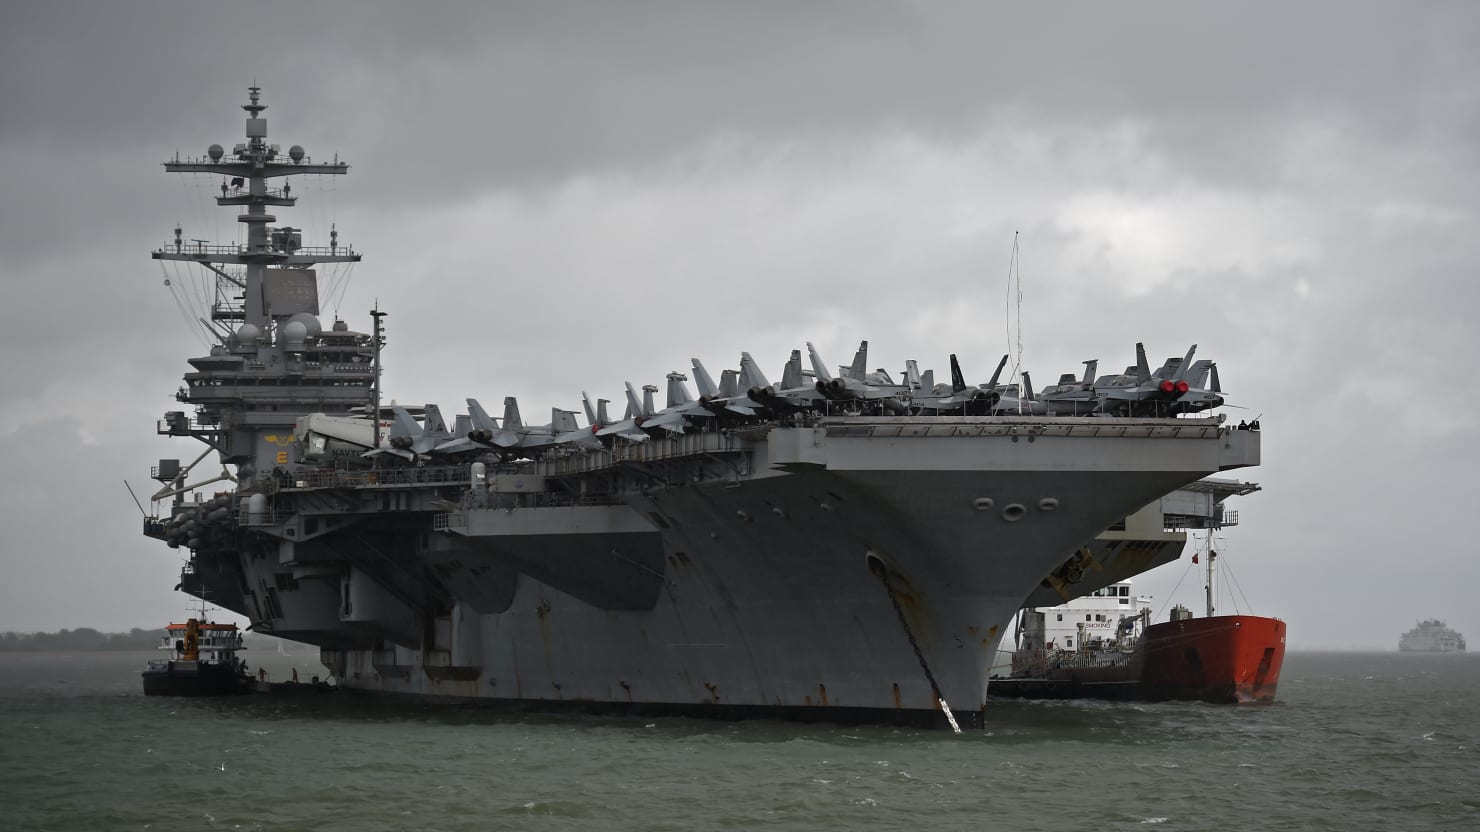 Four Suicides on U.S. Navy Aircraft Carrier Leads to Investigation